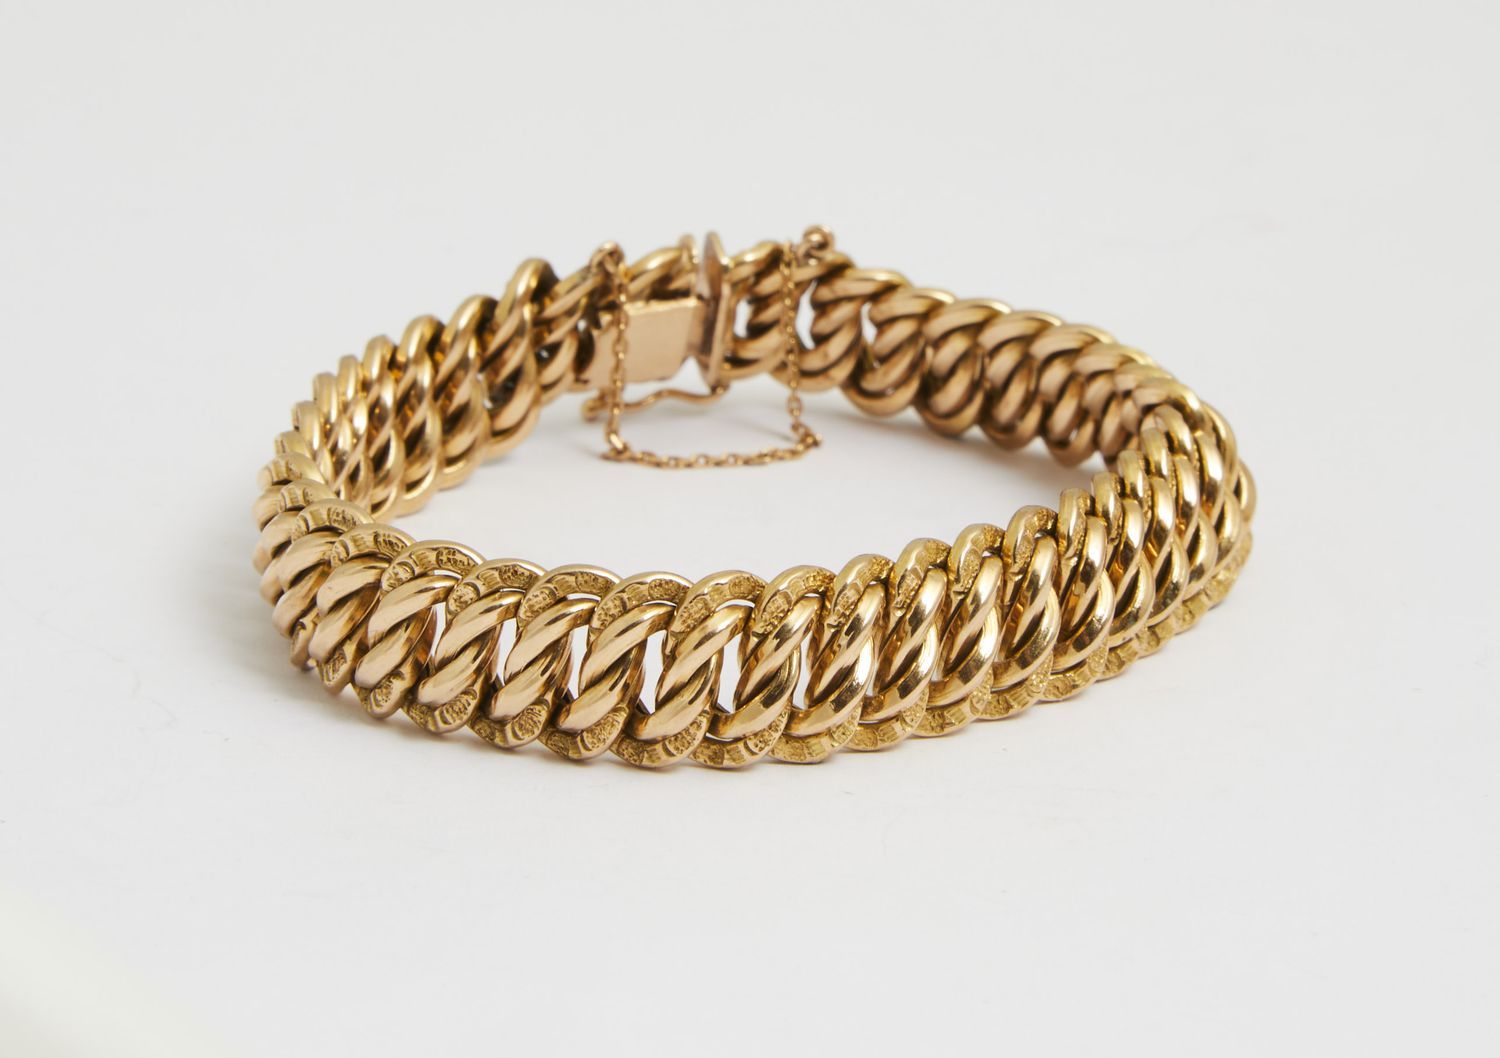 Null 346 Yellow gold bracelet with American mesh, wrist 19.5 cm, weight 36.4 g